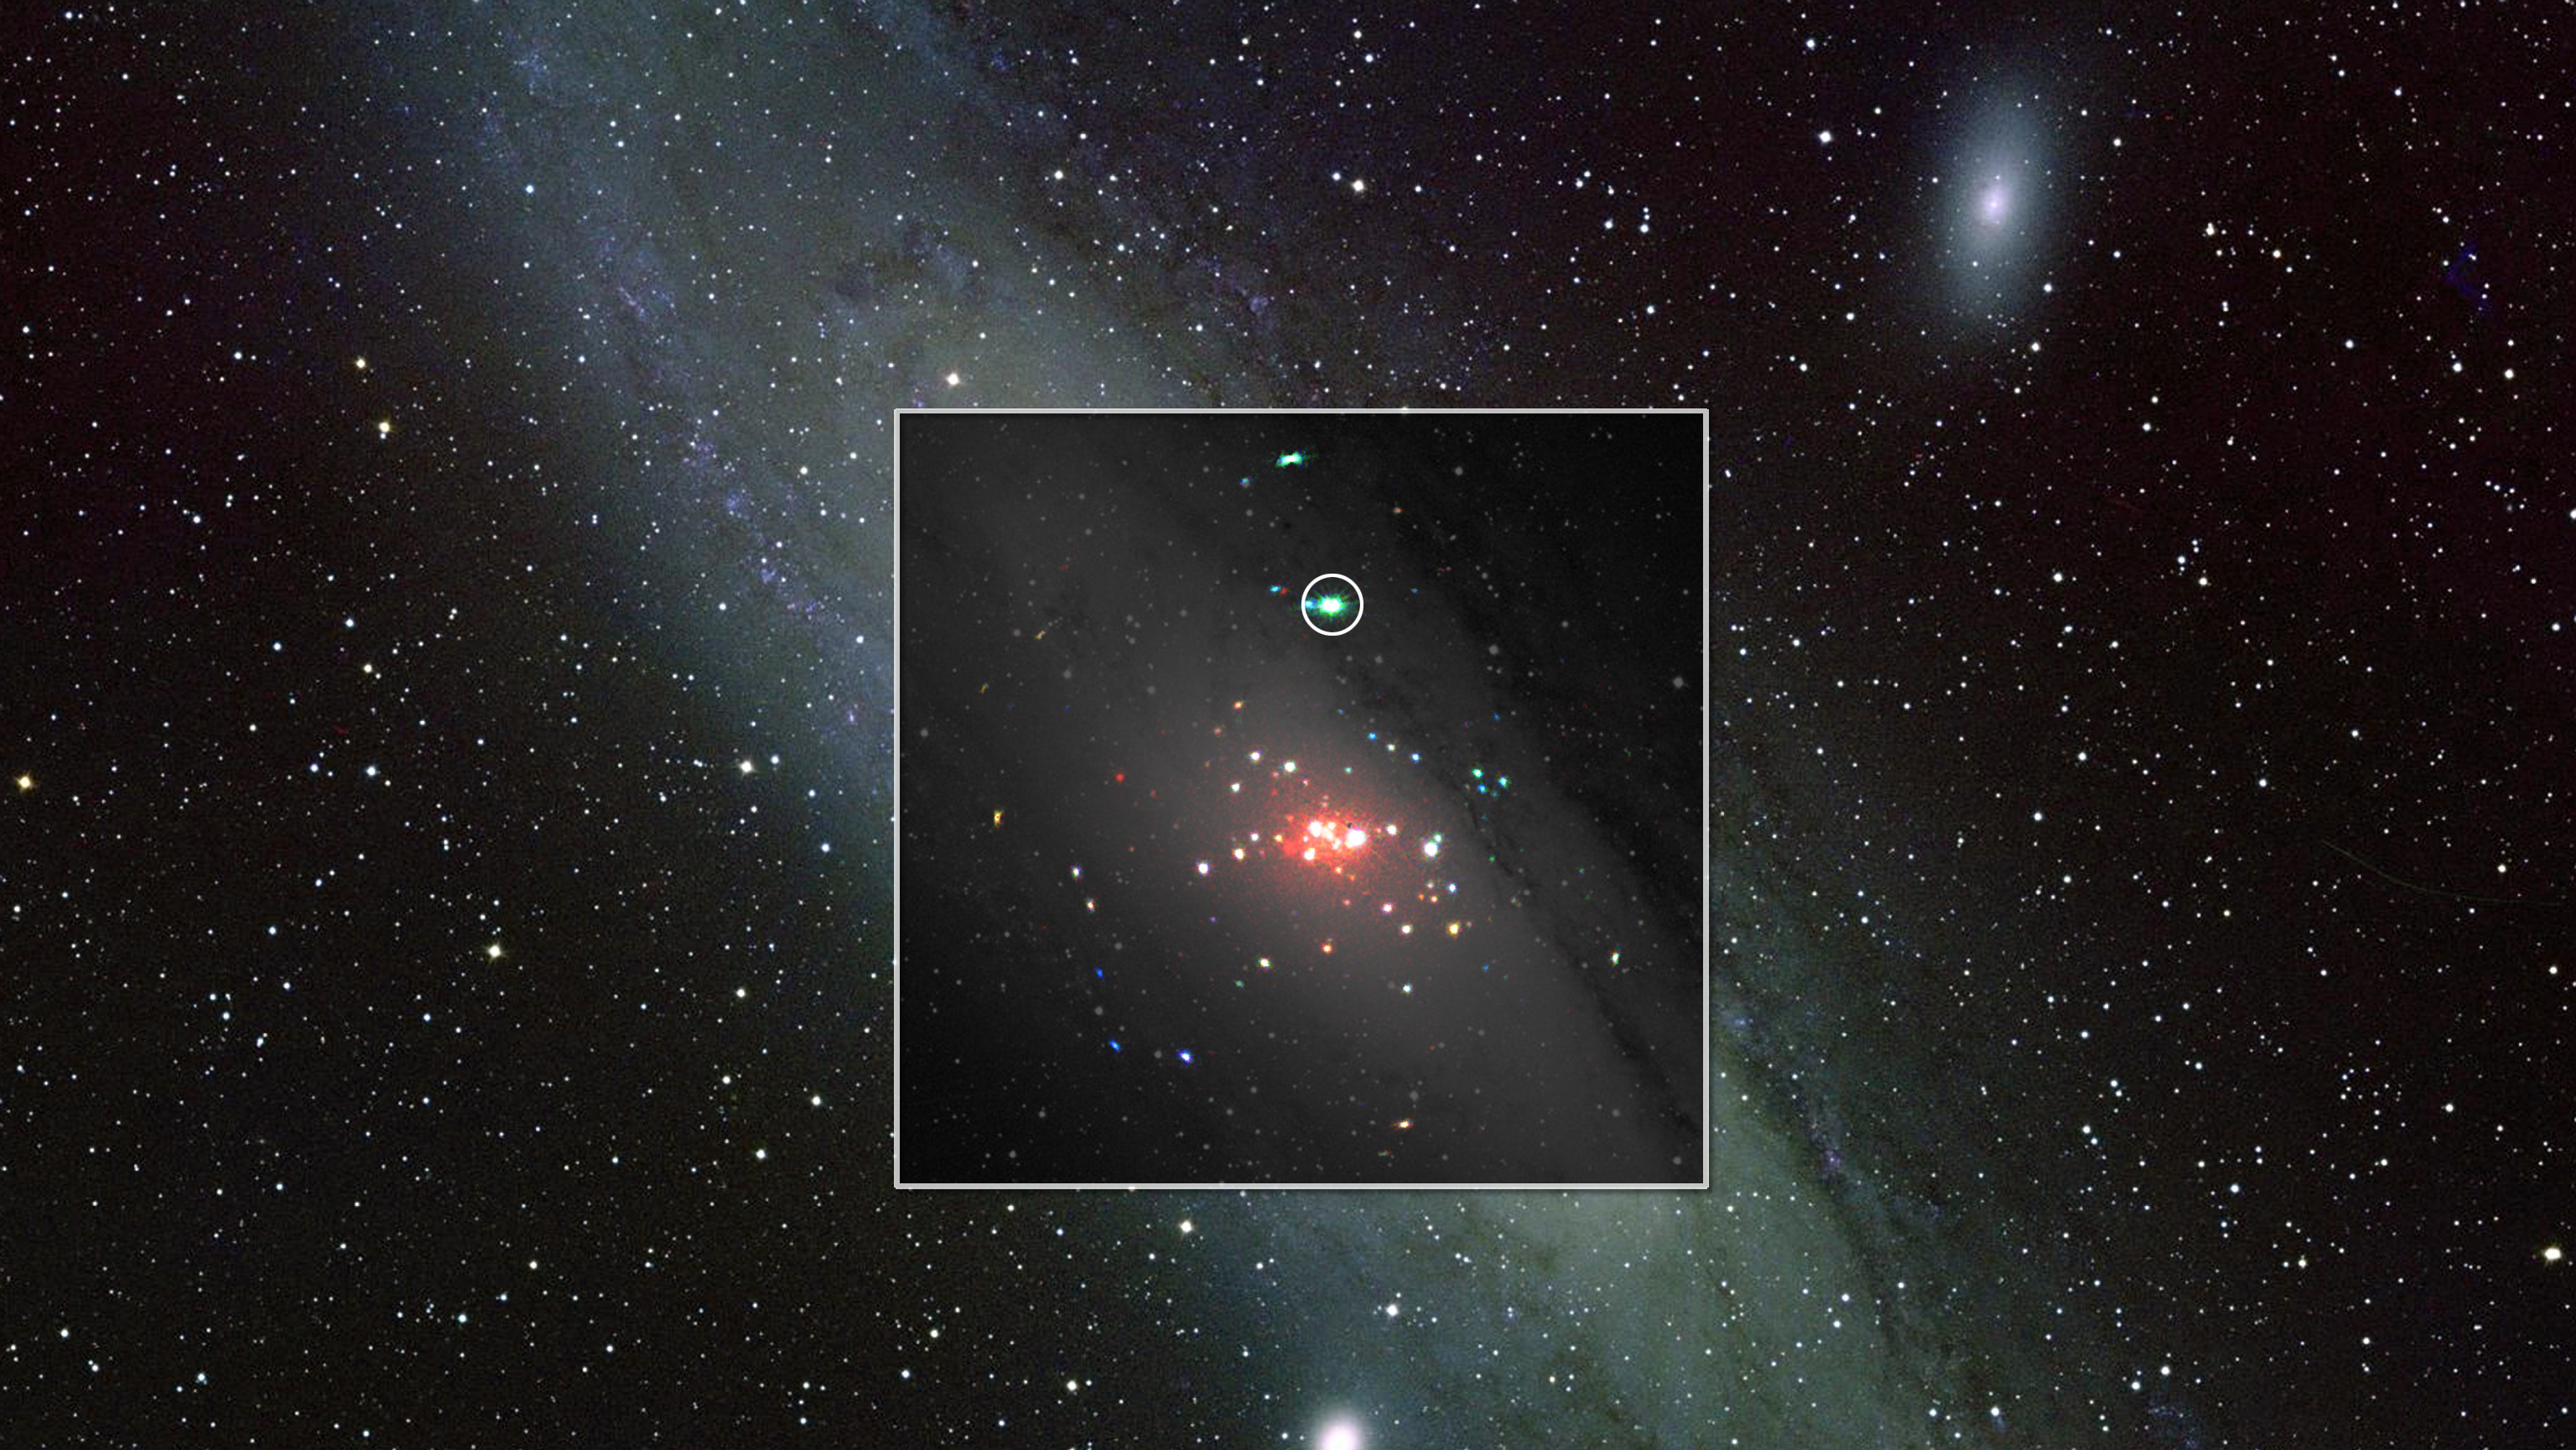 This image composites XMM-Newton X-ray data onto an optical view of the Andromeda galaxy; the ULX is circled. Colors in the XMM image correspond to different X-ray energies: 0.2 to 1 keV (red), 1 to 2 keV (green) and 2 to 4.5 keV (blue). LabelsInset: ESA/M. Middleton et al.; background: Bill Schoening, Vanessa Harvey/REU program/NOAO/AURA/NSF